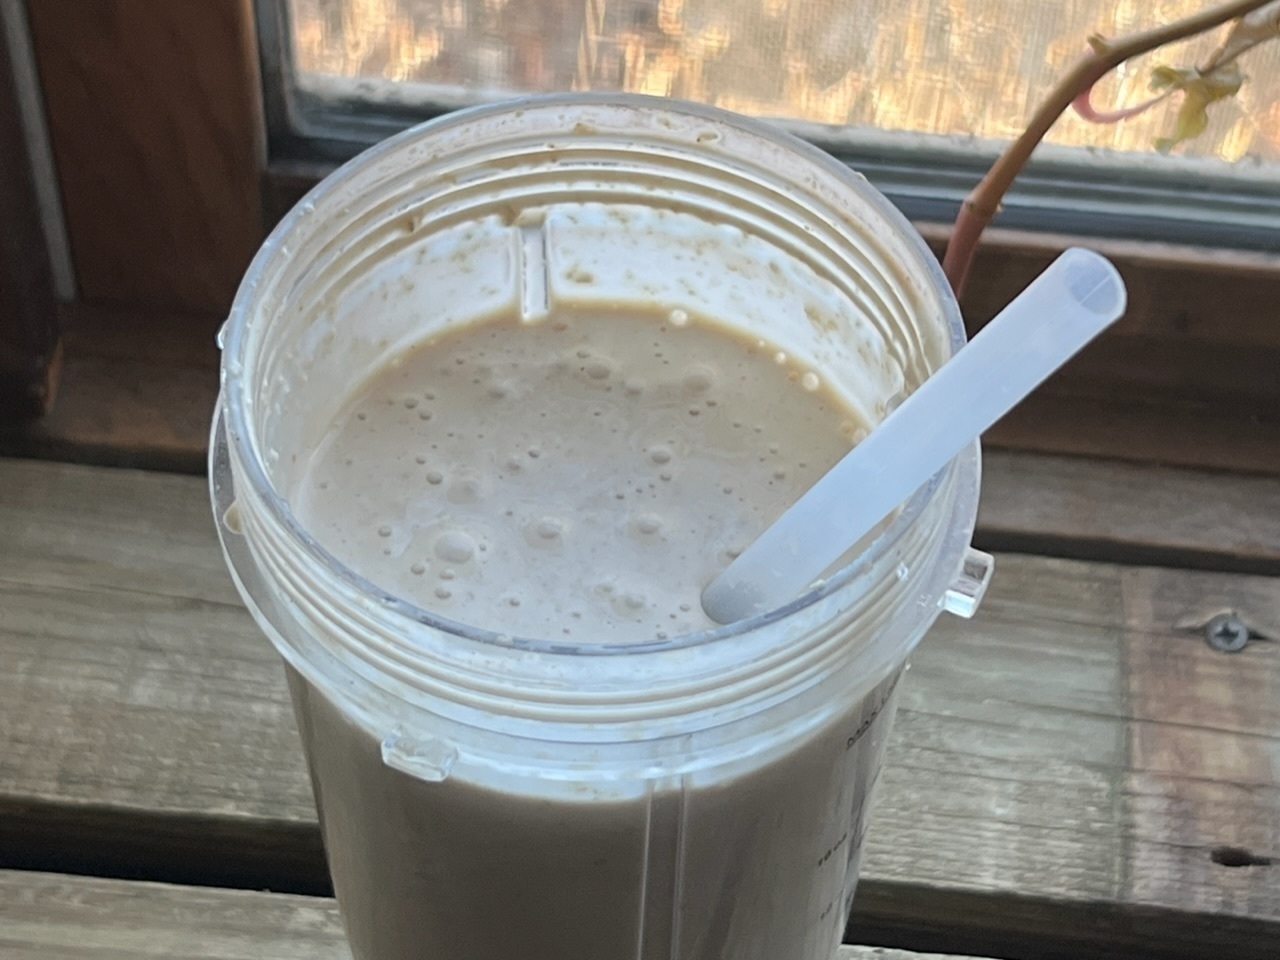 A creamy smoothie in a clear plastic tumbler with a straw